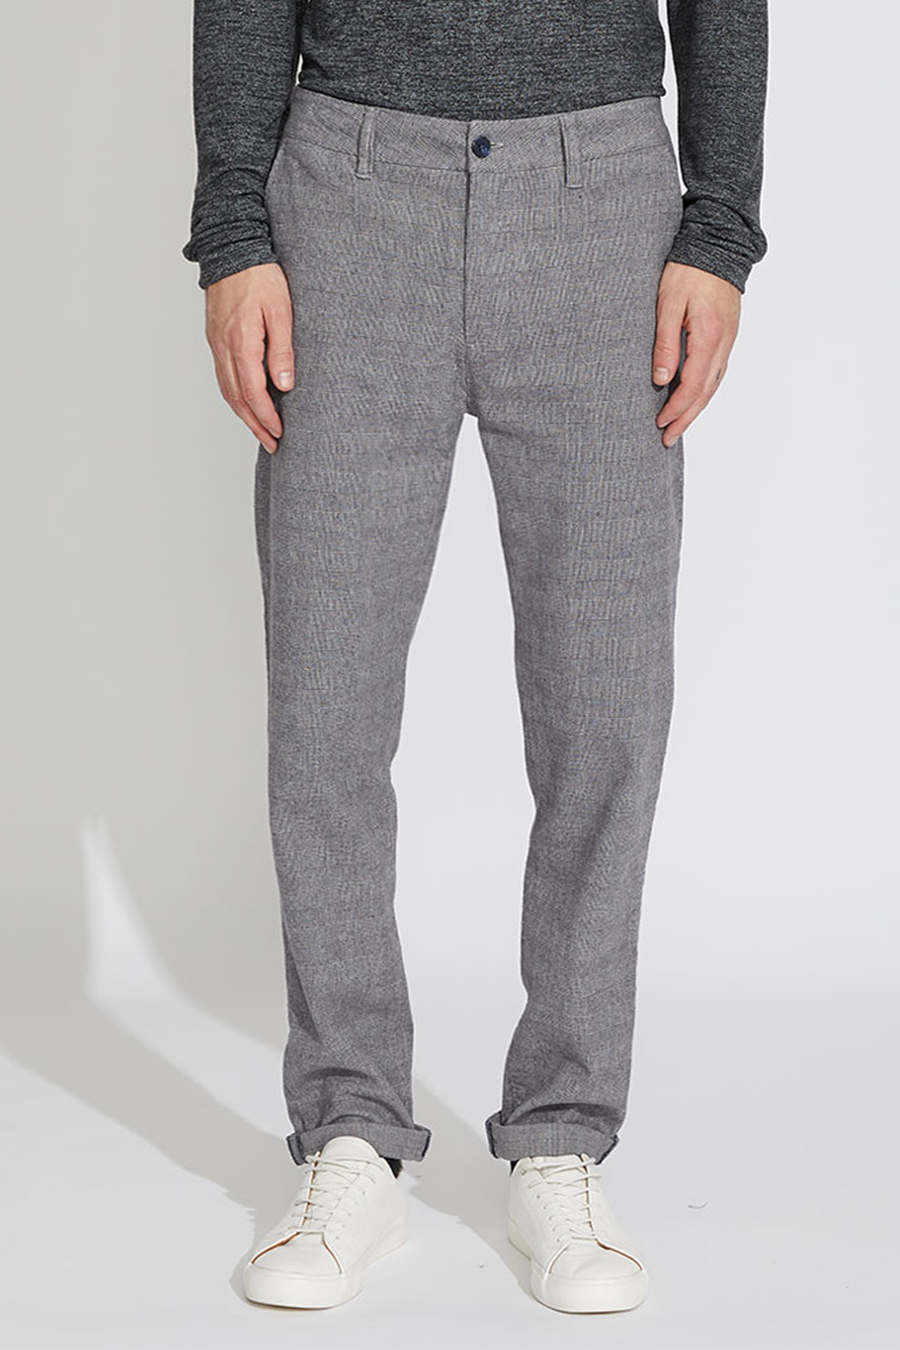 Ward Knit Plaid Pants | Slate - West of Camden - Main Image Number 1 of 1